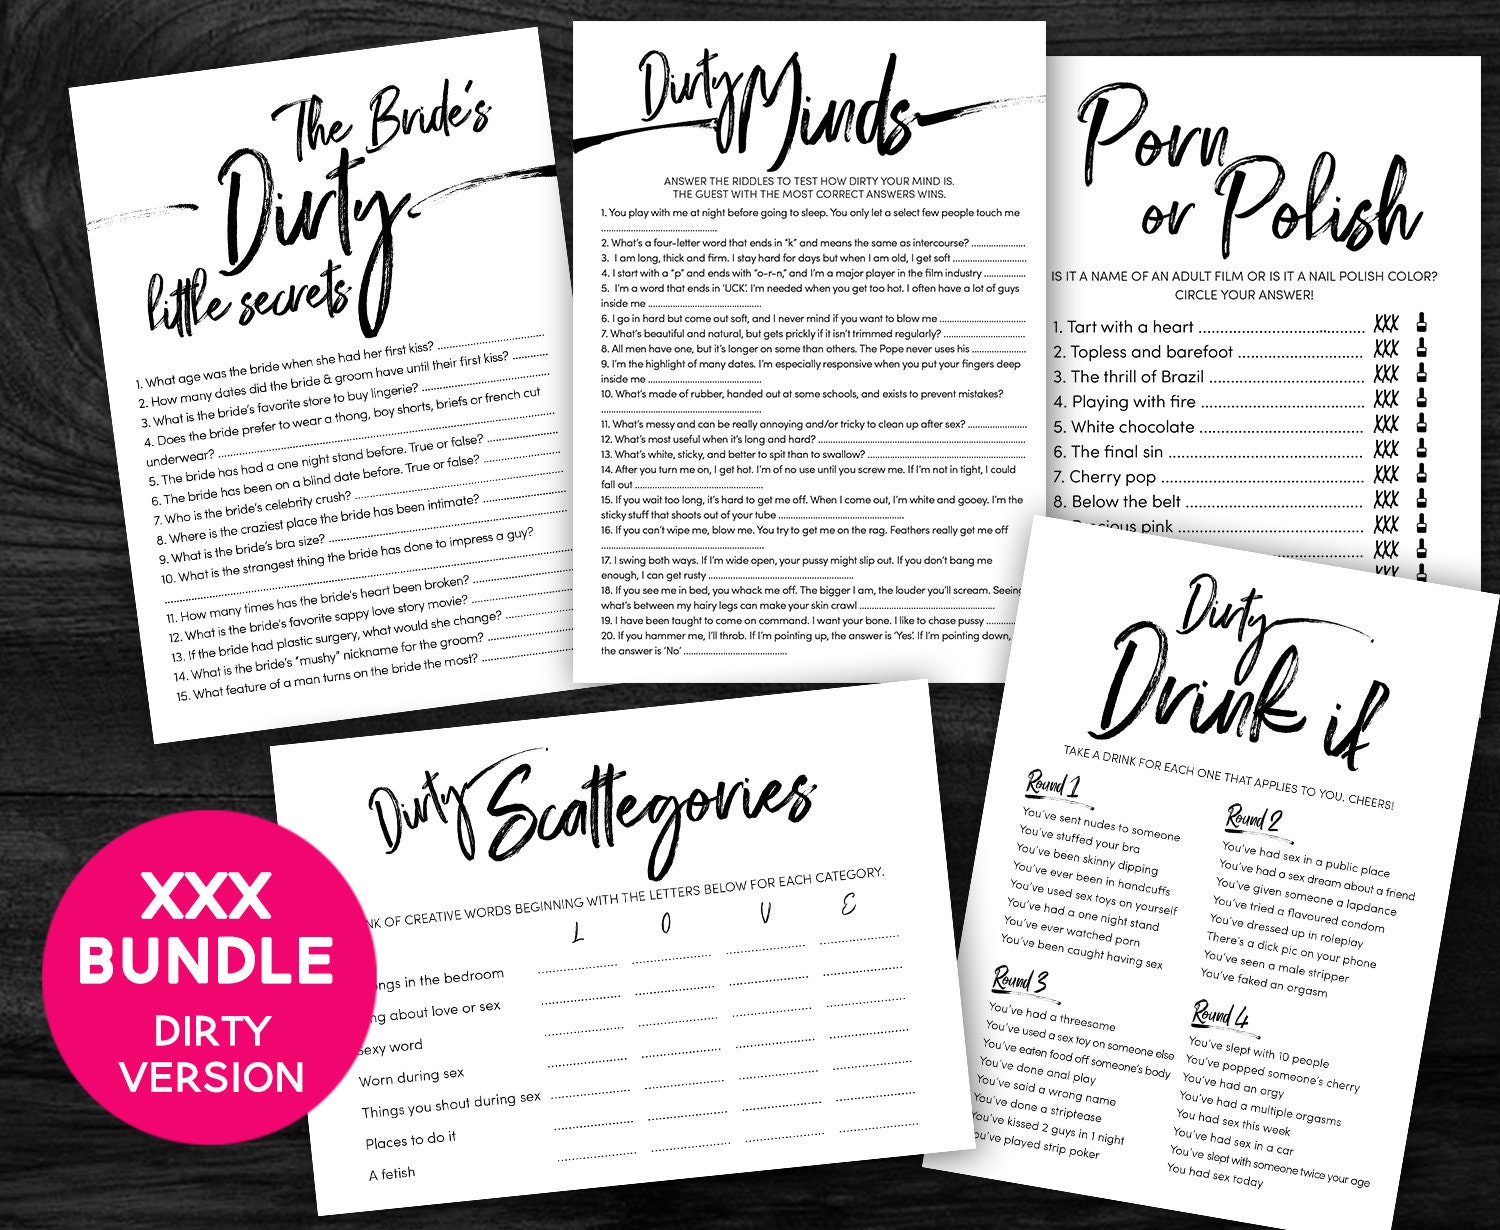 Dirty Party Games - 5 Naughty Bachelorette Party Games Hen Party Games Dirty - Etsy